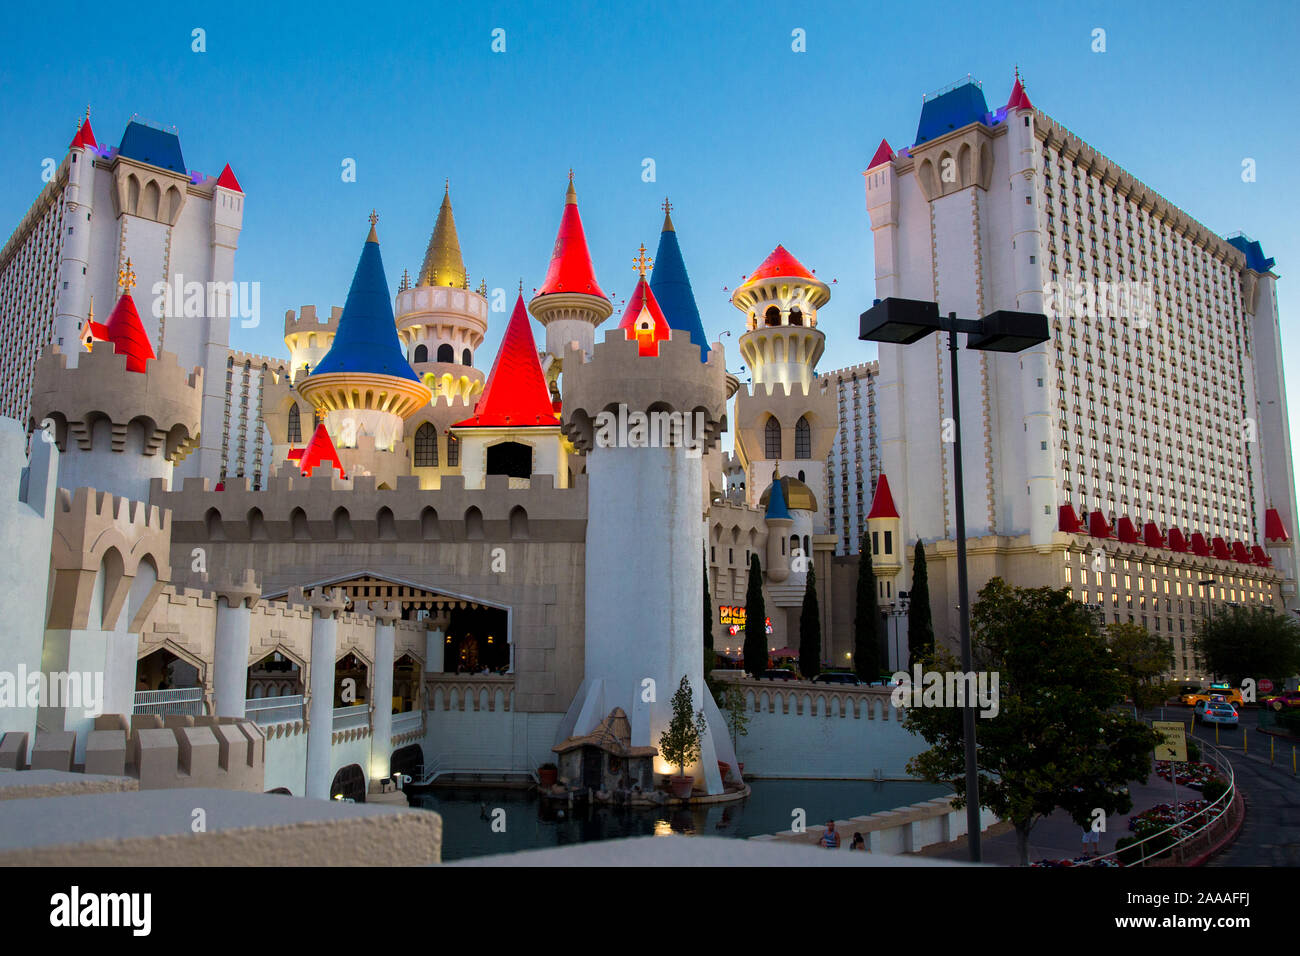 LAS VEGAS, NEVADA - MAY 19, 2017: View from Excalibur Hotel and Casino in Las Vegas Nevada seen in the evening with lights Stock Photo